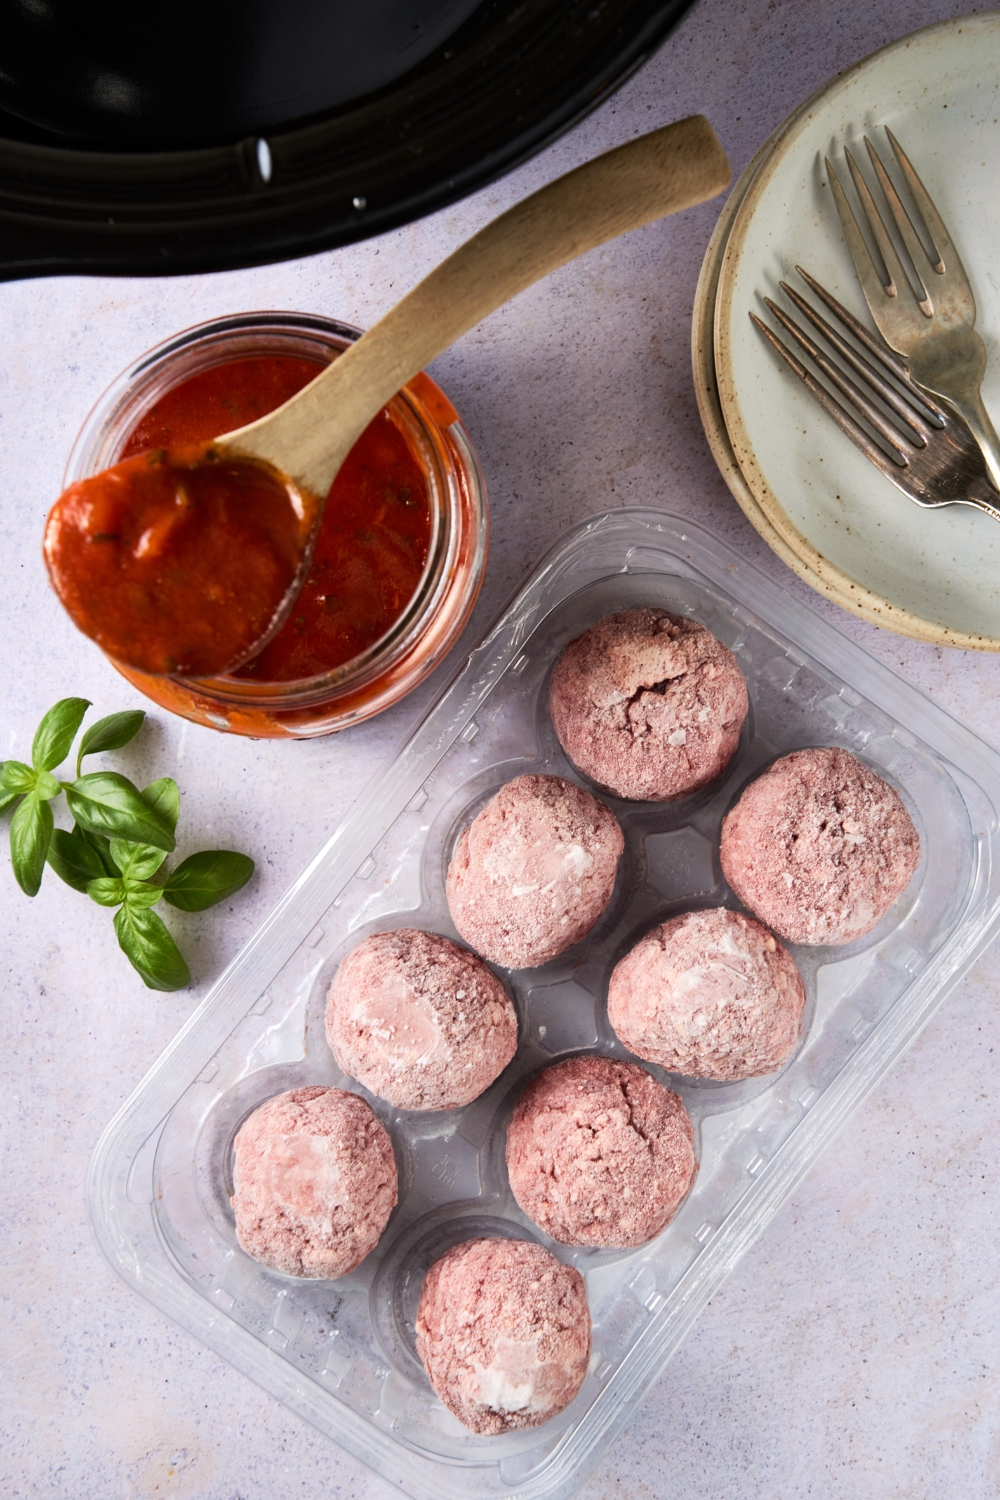 Eight frozen meatballs, a jar of tomato sauce, and fresh basil are sitting on a white counter.